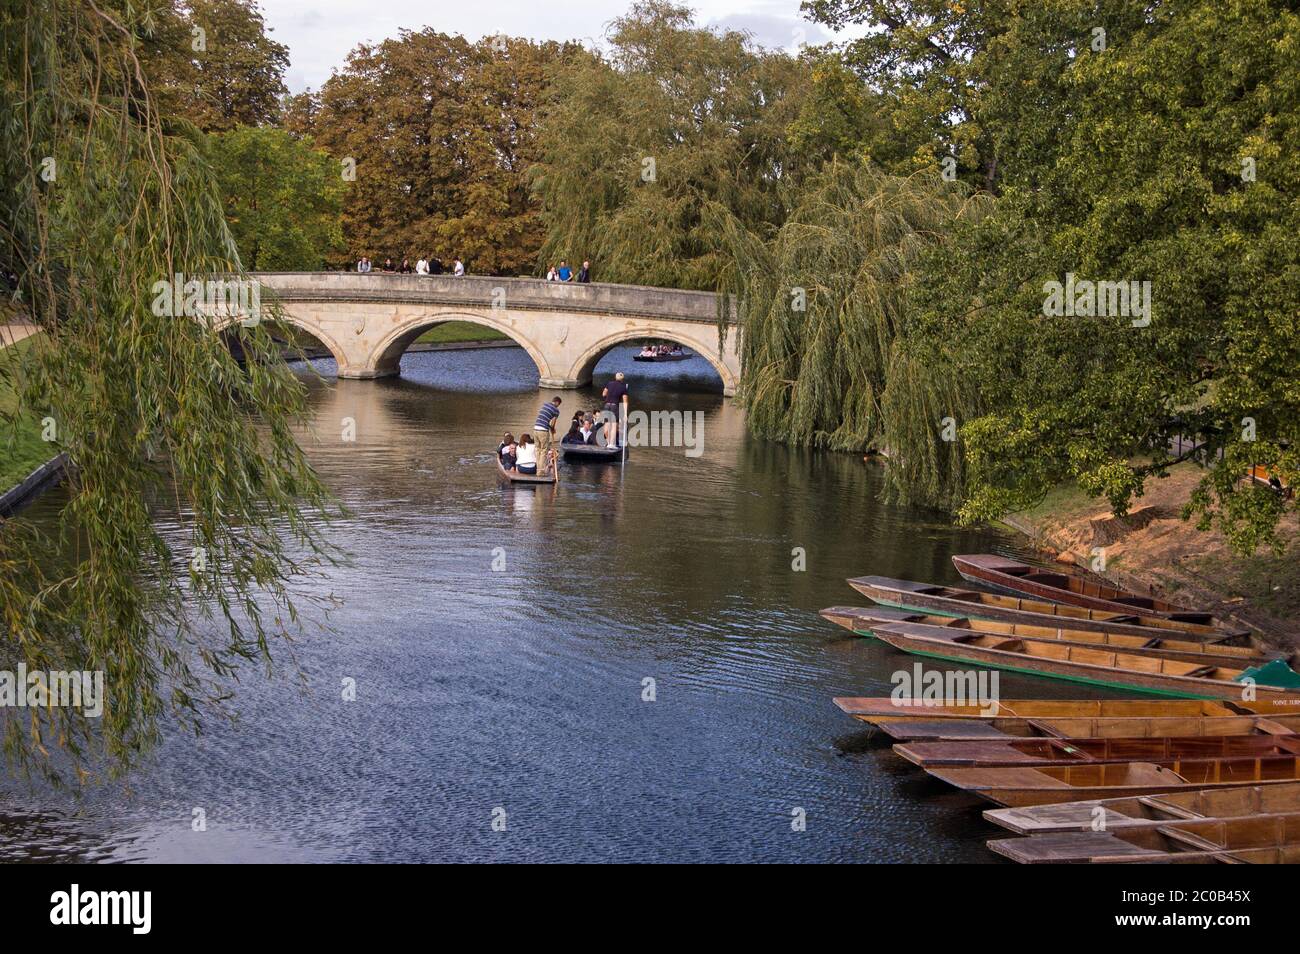 Cambridge, UK - September 19, 2011:  University students punting along the River Cam in Cambridge on September 19 2011. Competition to rent the small Stock Photo